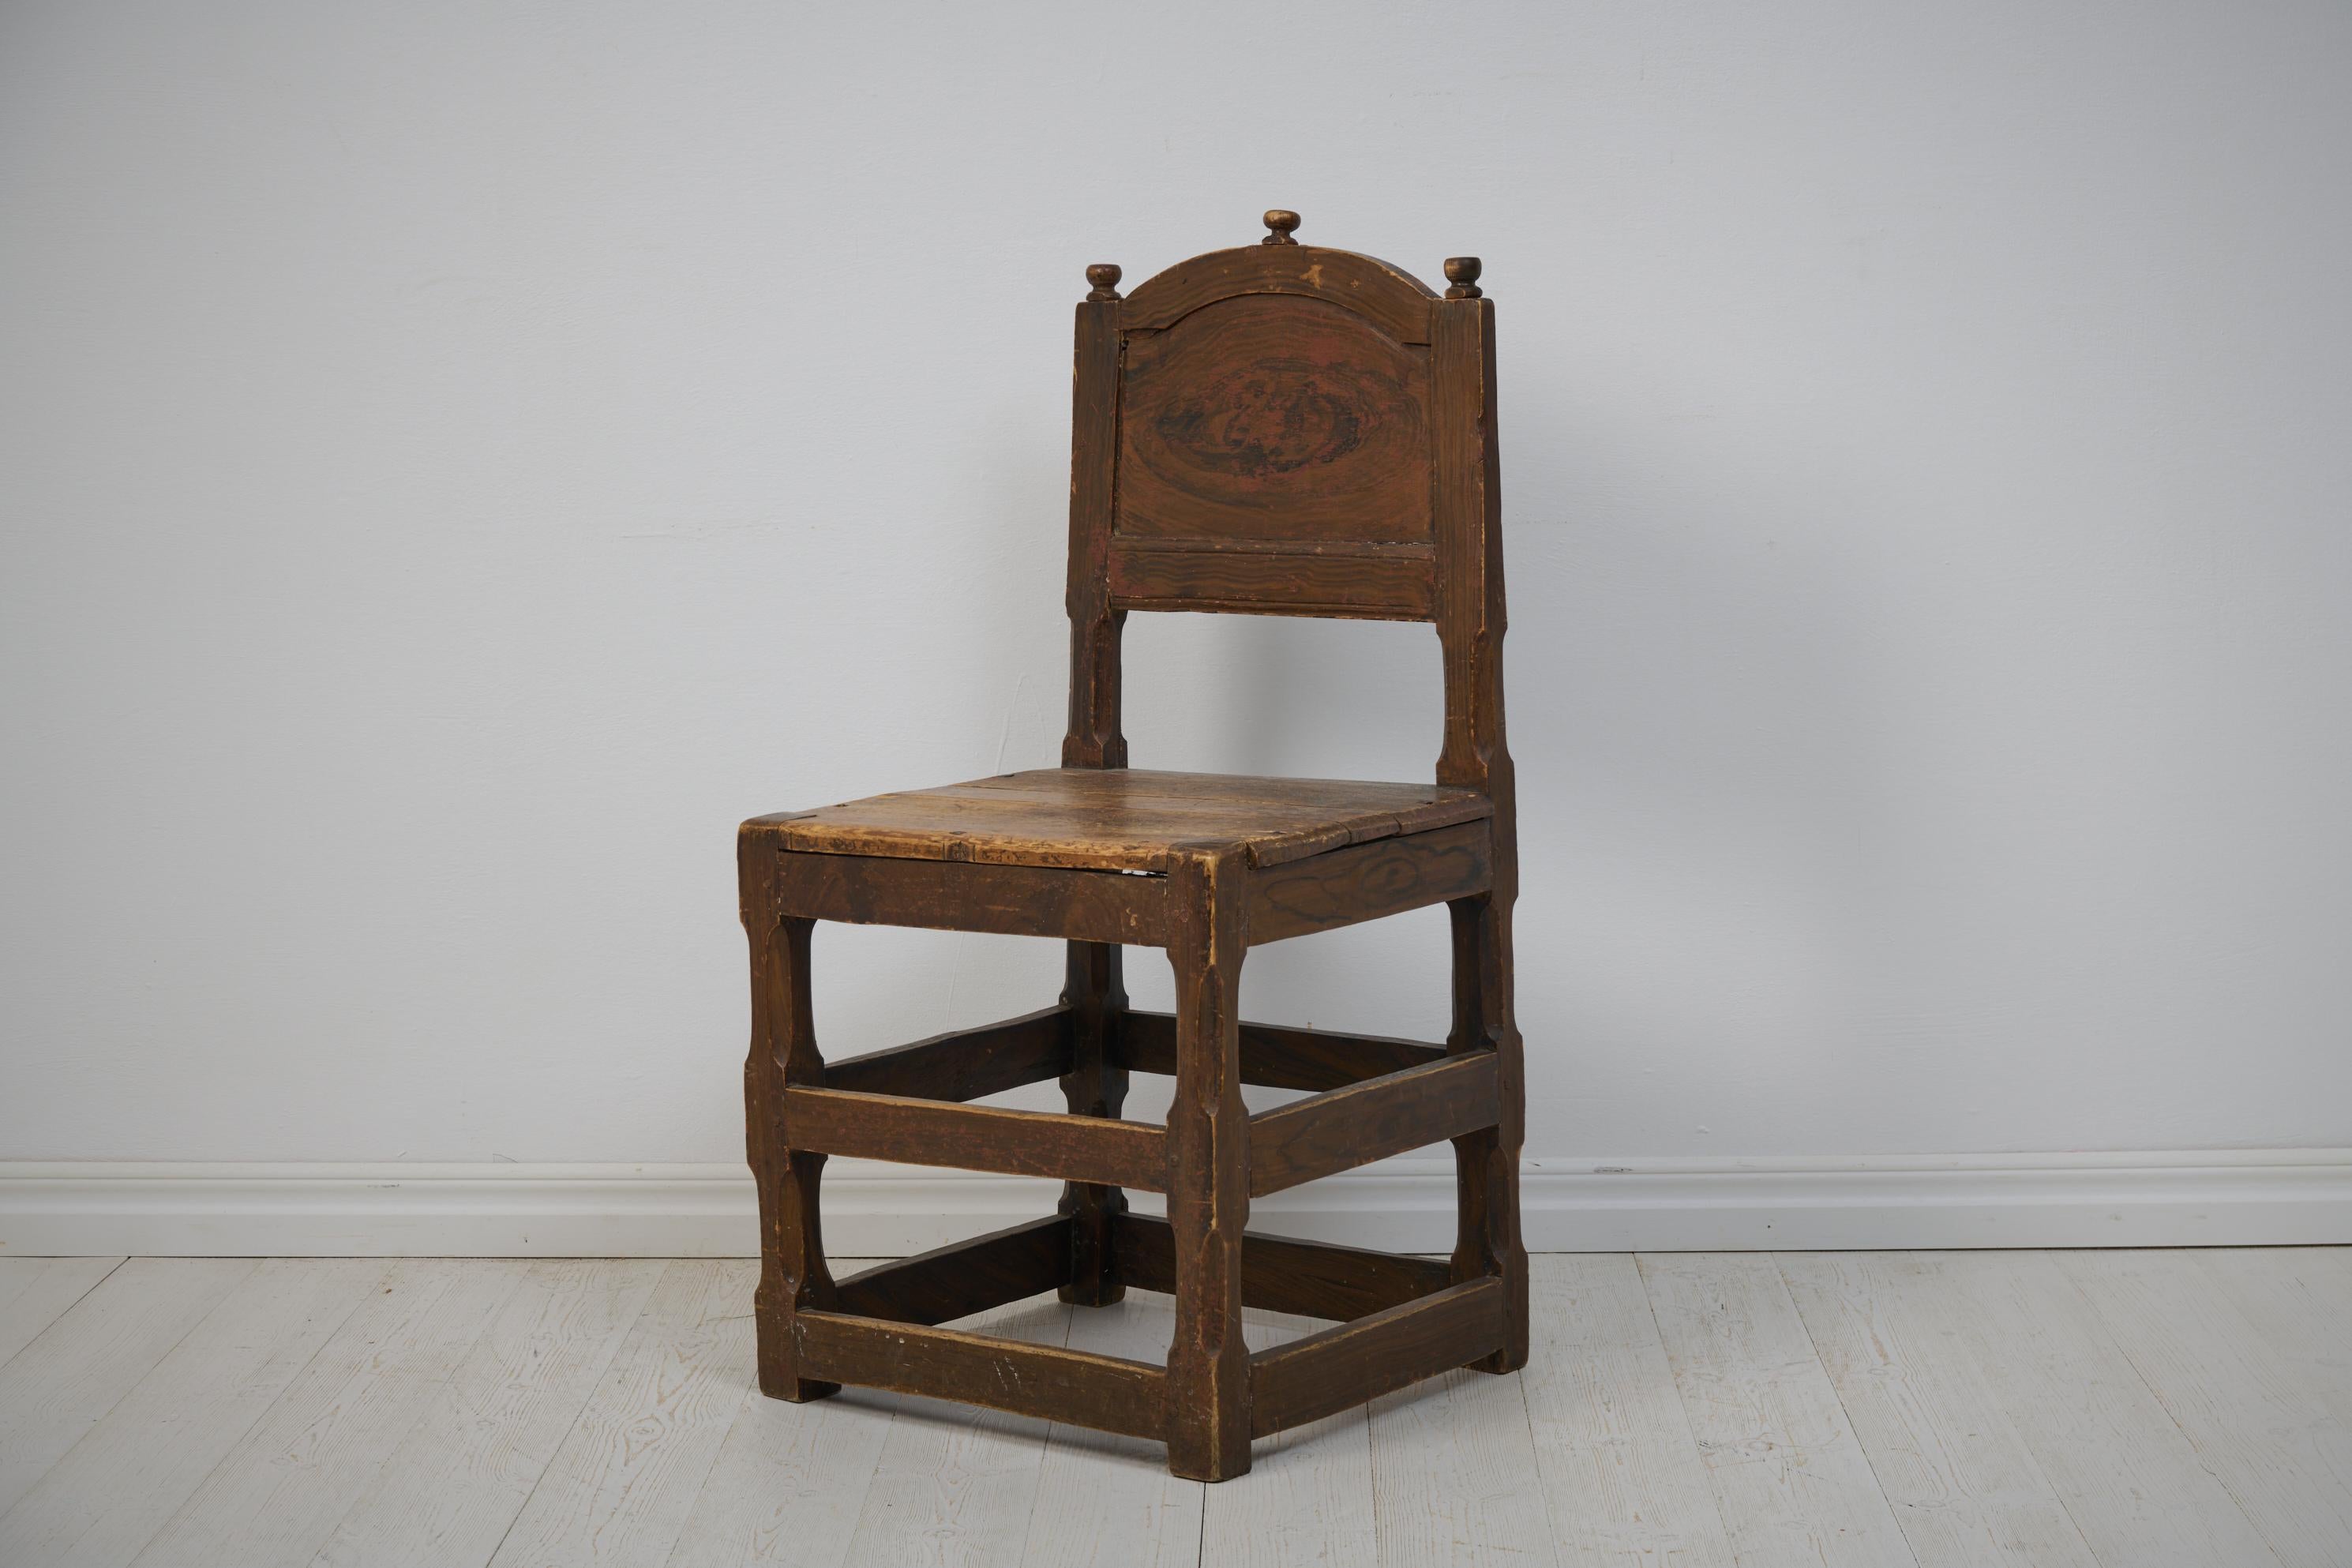 Unusually large baroque chair from Sweden made around 1770. The chair has a frame in solid pine with original faux paint. The painter has made a free interpretation of walnut. The paint has distress after use. The chair is unusually large, please